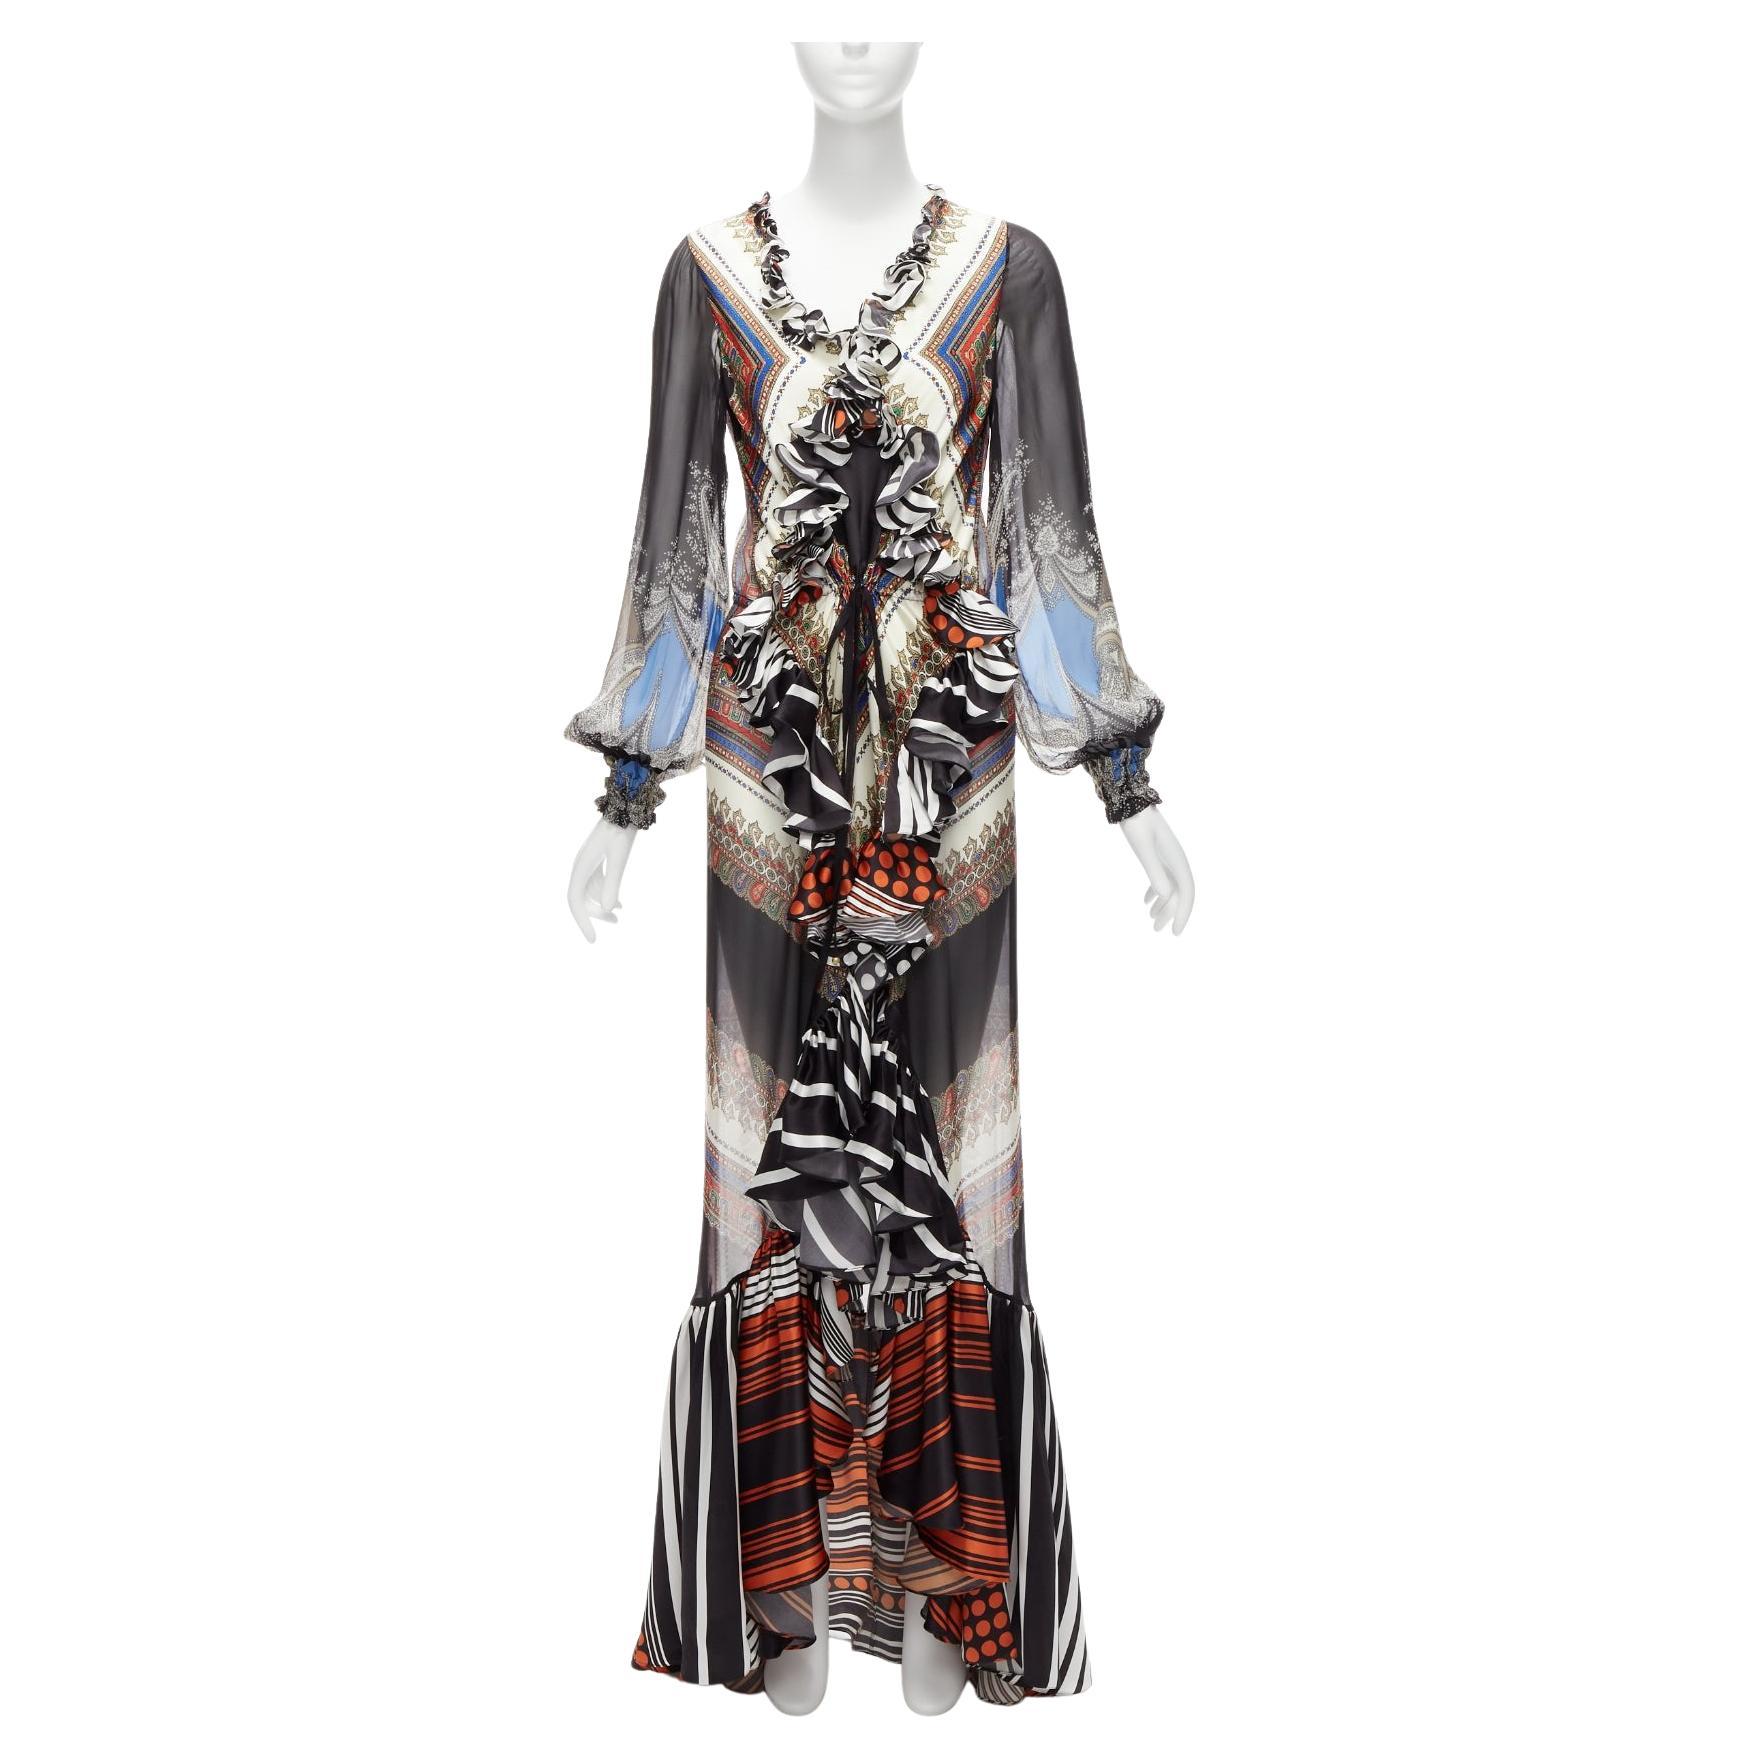 GIVENCHY RICCARDO TISCI 2013 Runway mixed print sheer ruffle gown dress FR38 M For Sale